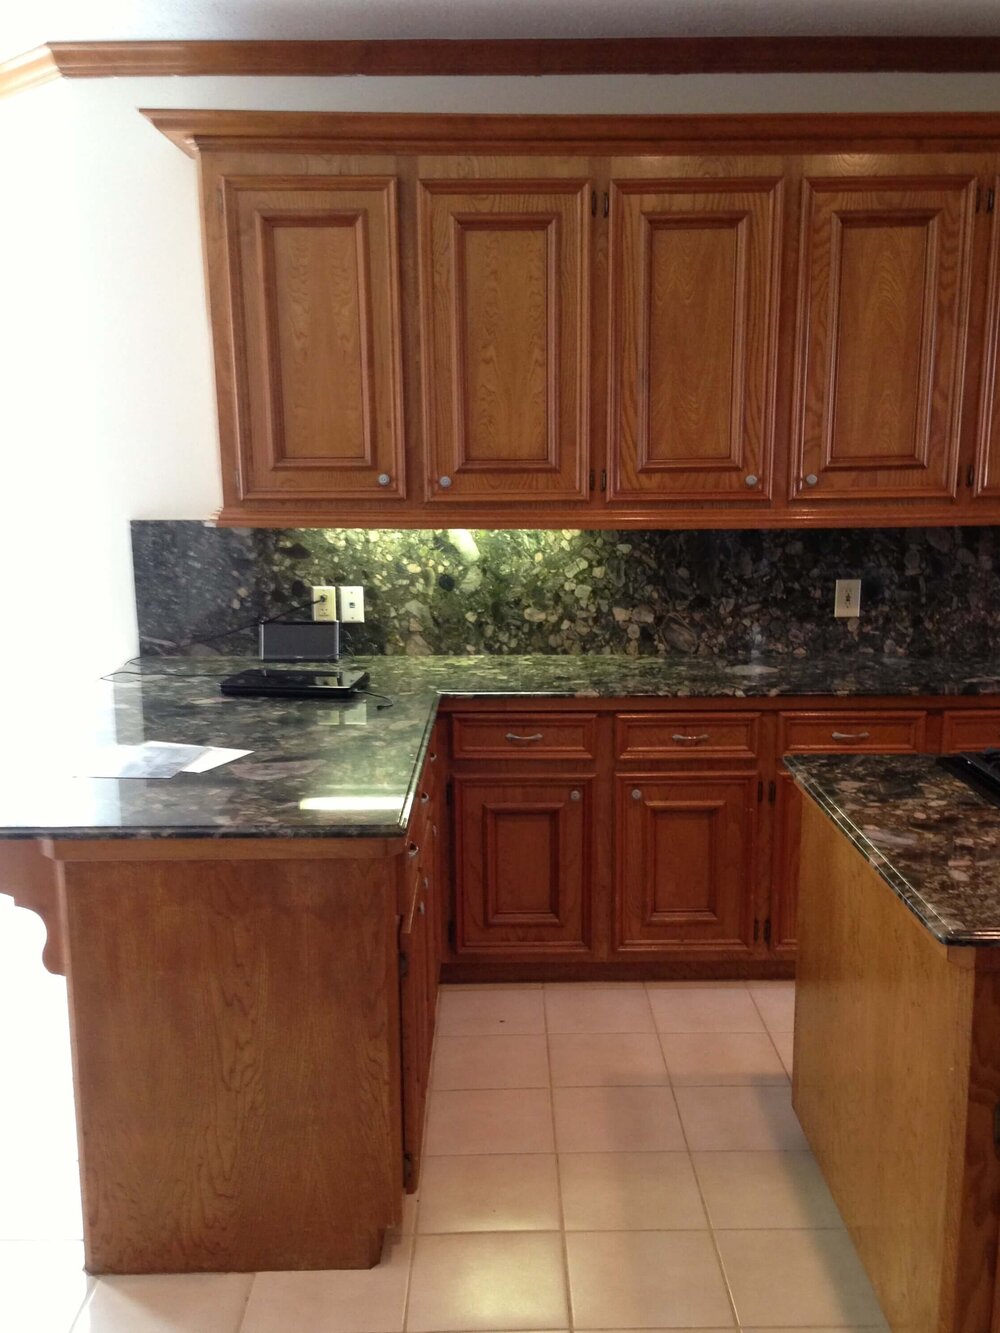 BEFORE REMODEL - Kitchen cabinets were dated and had heavy mouldings. They were short of the 9’-0” high ceiling.